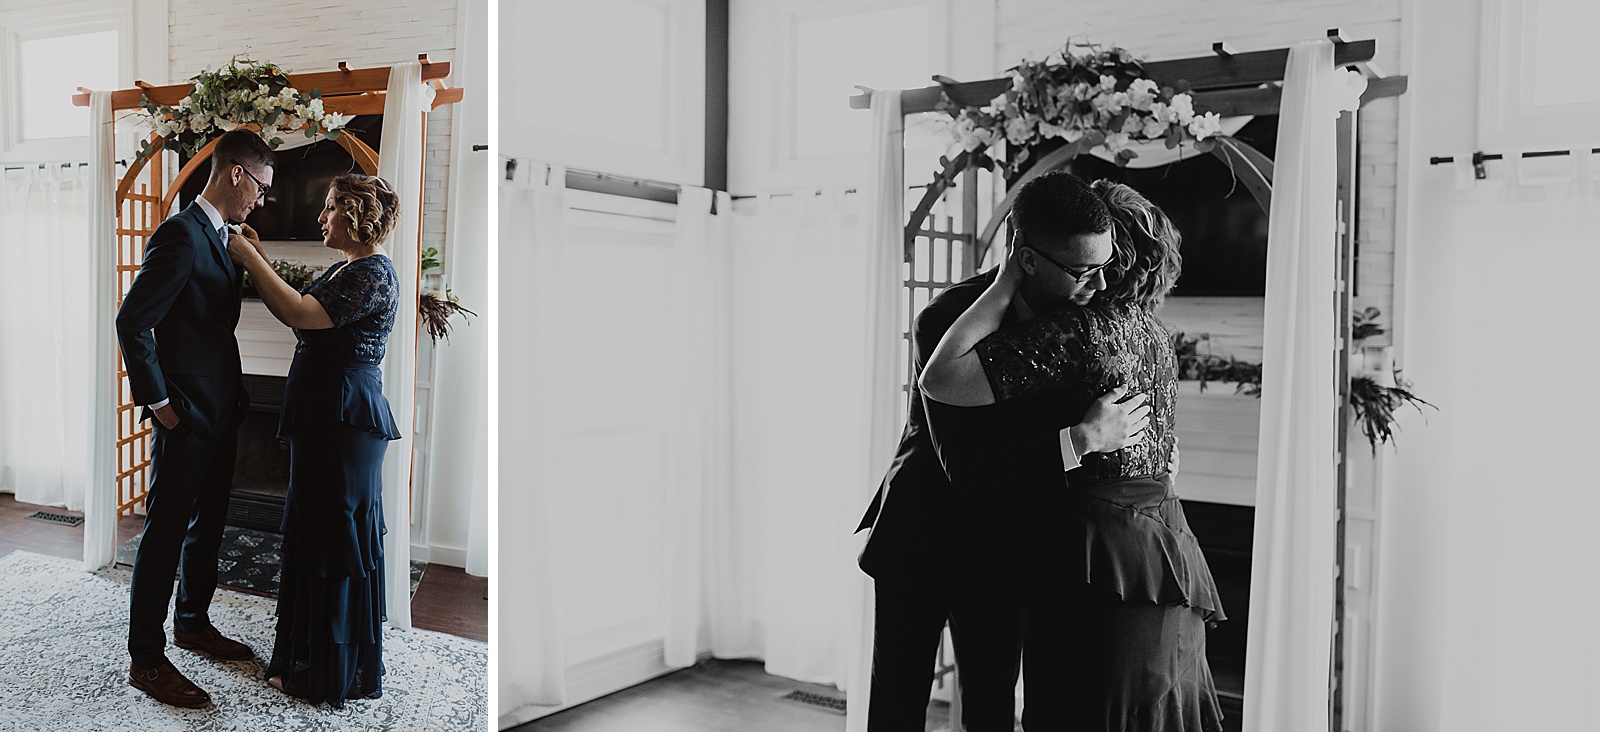 At Home COVID wedding captured by Caitlyn Cloud Photography